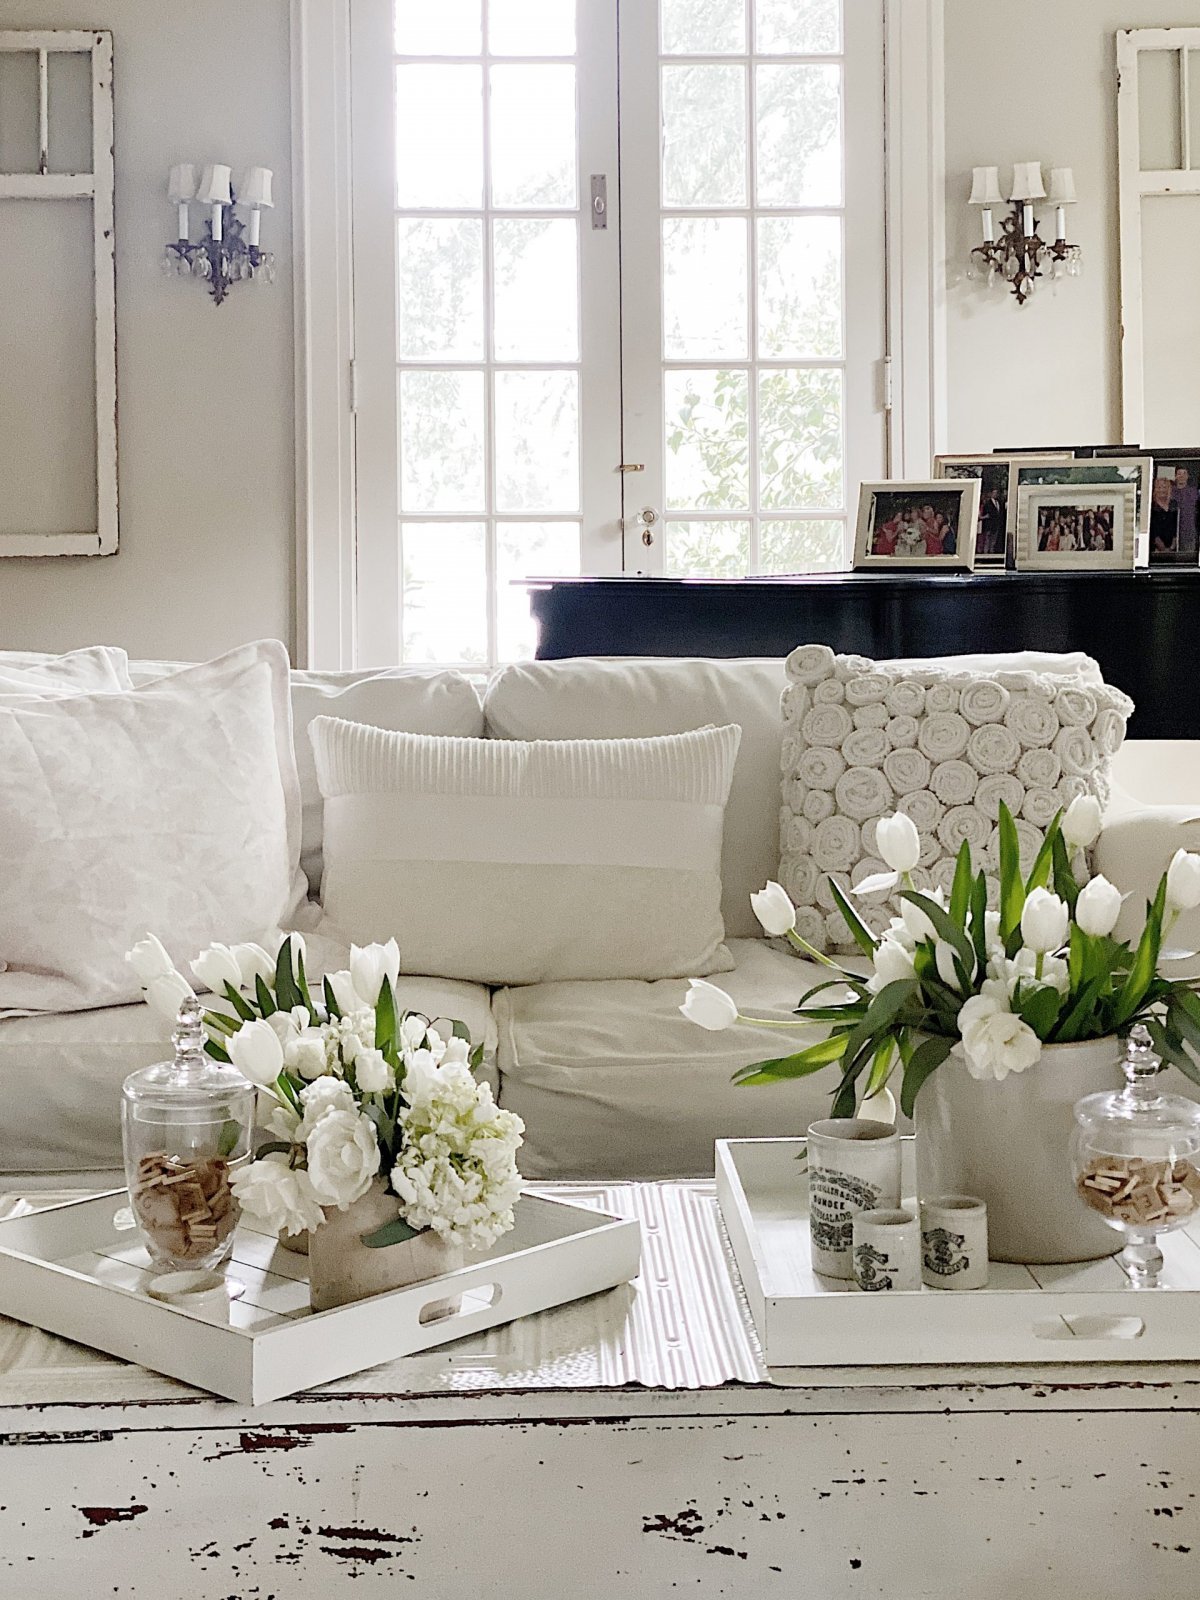 How To Style A Coffee Table ~ with BLOOMIST | Coffee table, Table, Table  decorations